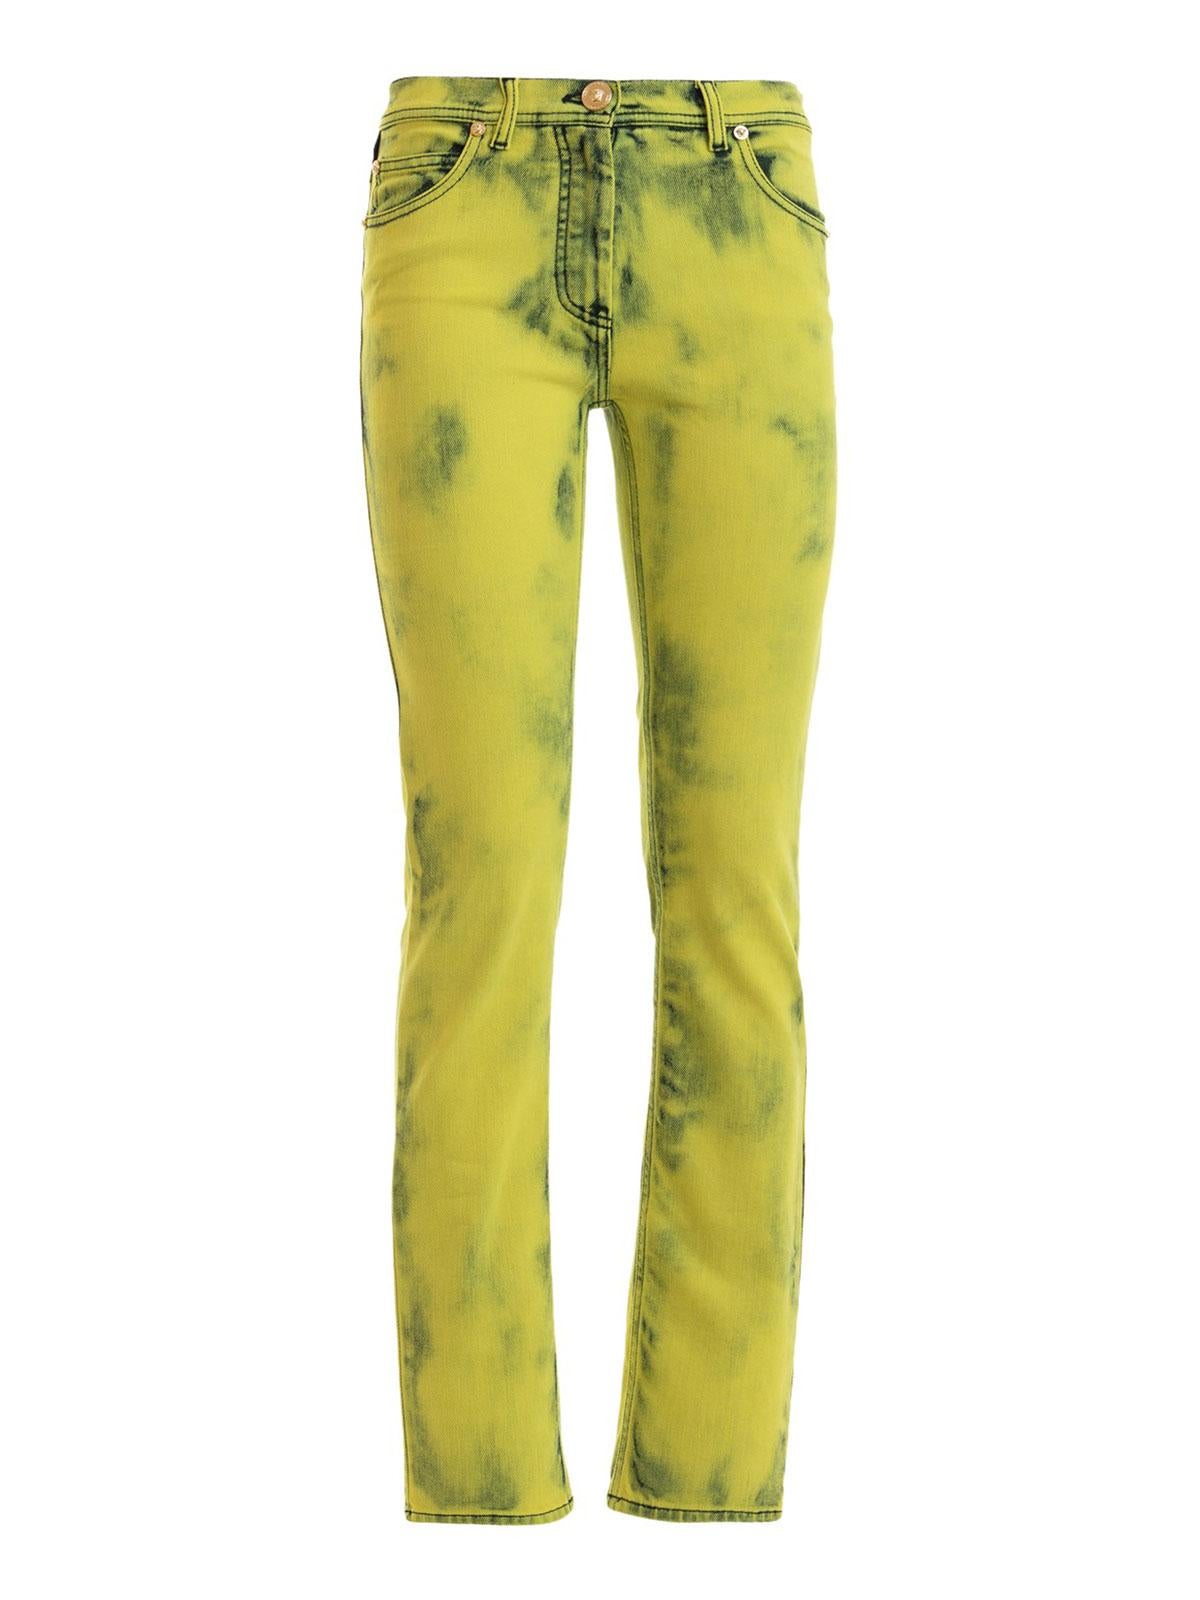 Versace Yellow Acid Wash Denim Skinny Jeans with Logo Label Size 27 For Sale 2